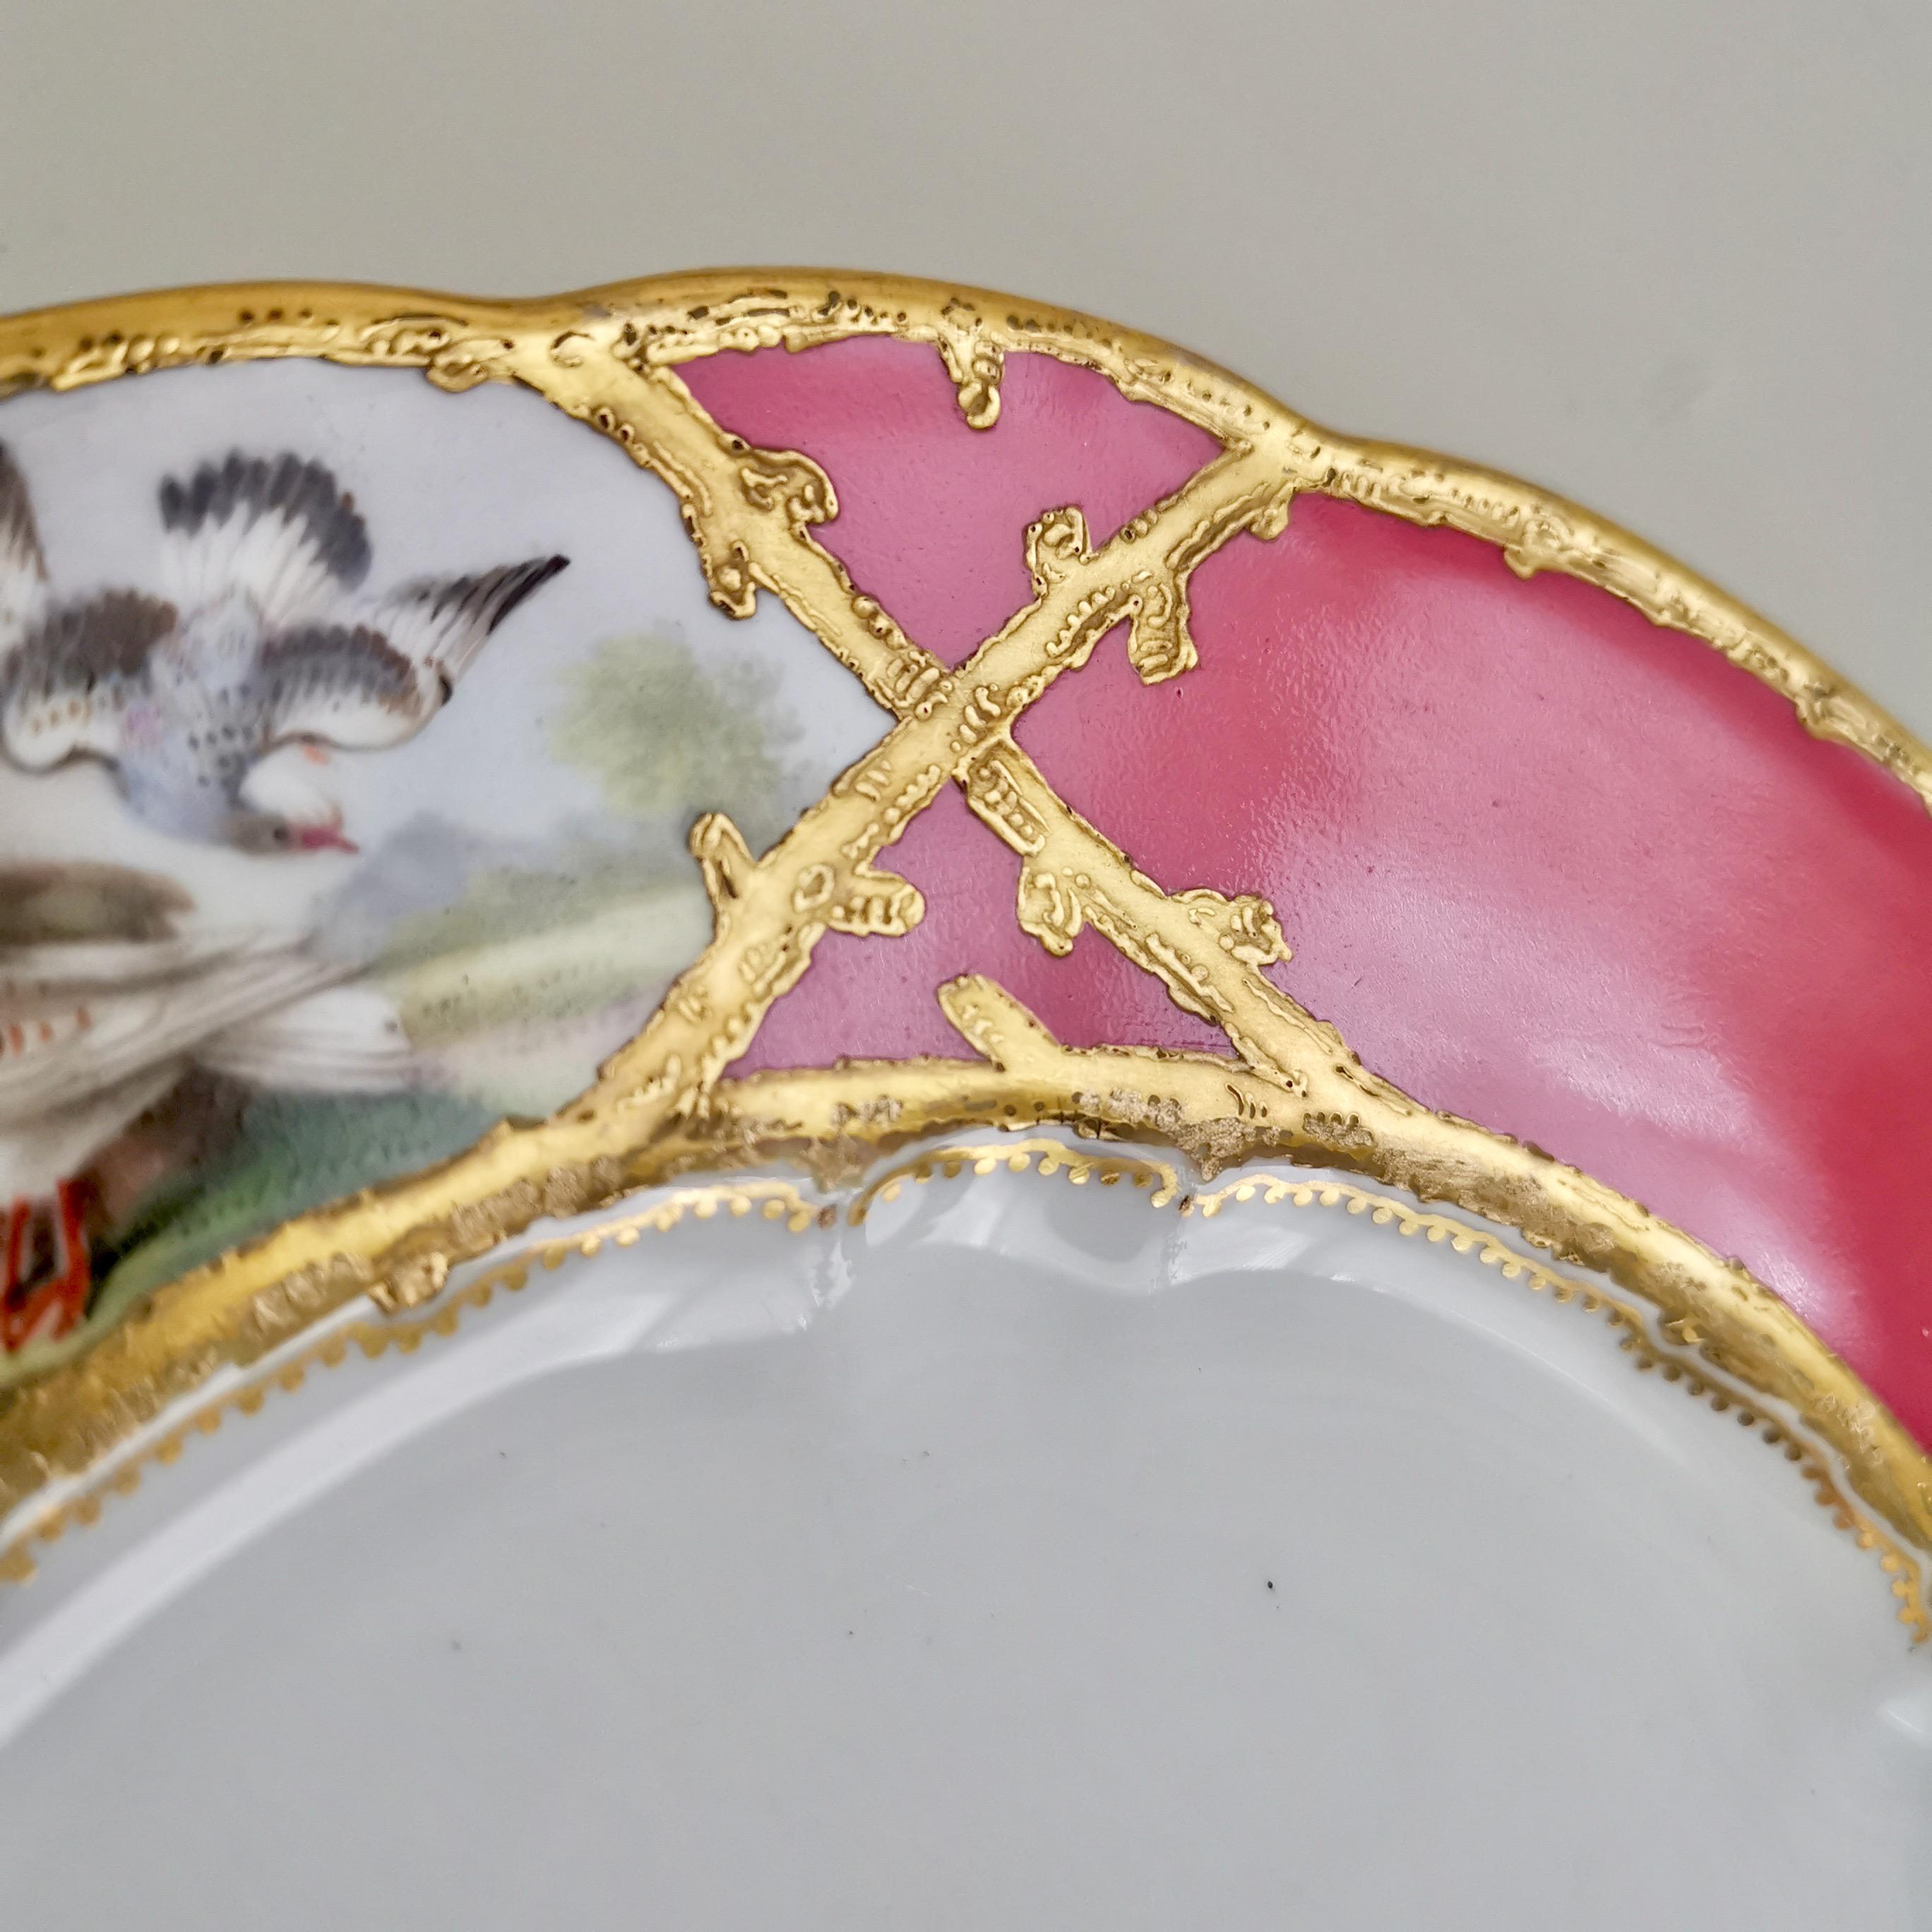 English Coalport Porcelain Plate, Hot Pink with Birds and Fish, Raised Gilt, ca 1870